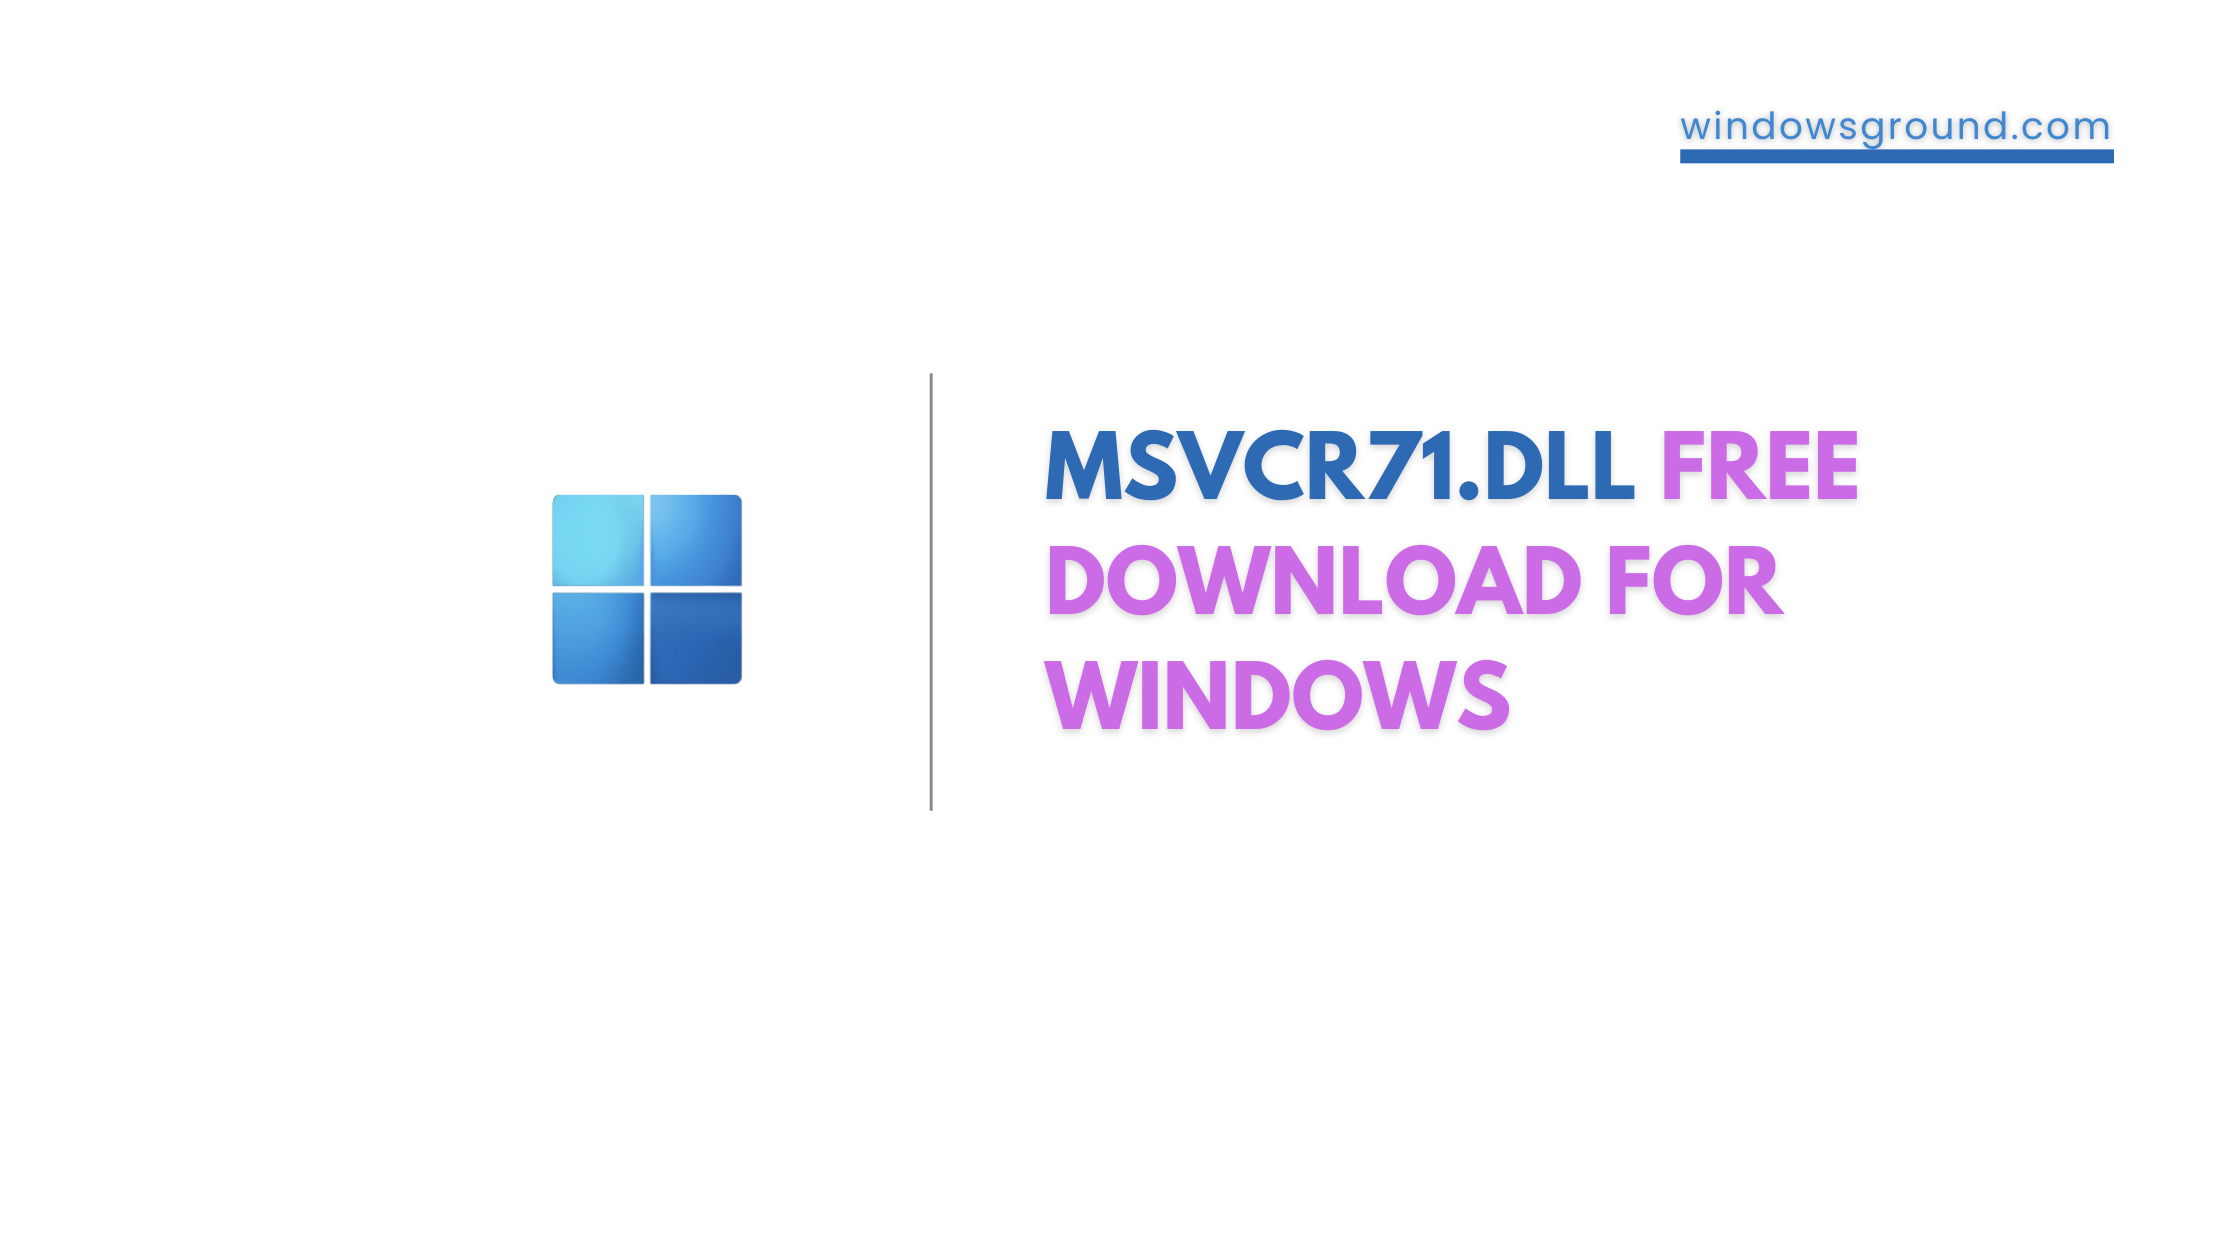 Msvcr71.dll Free Download For Windows